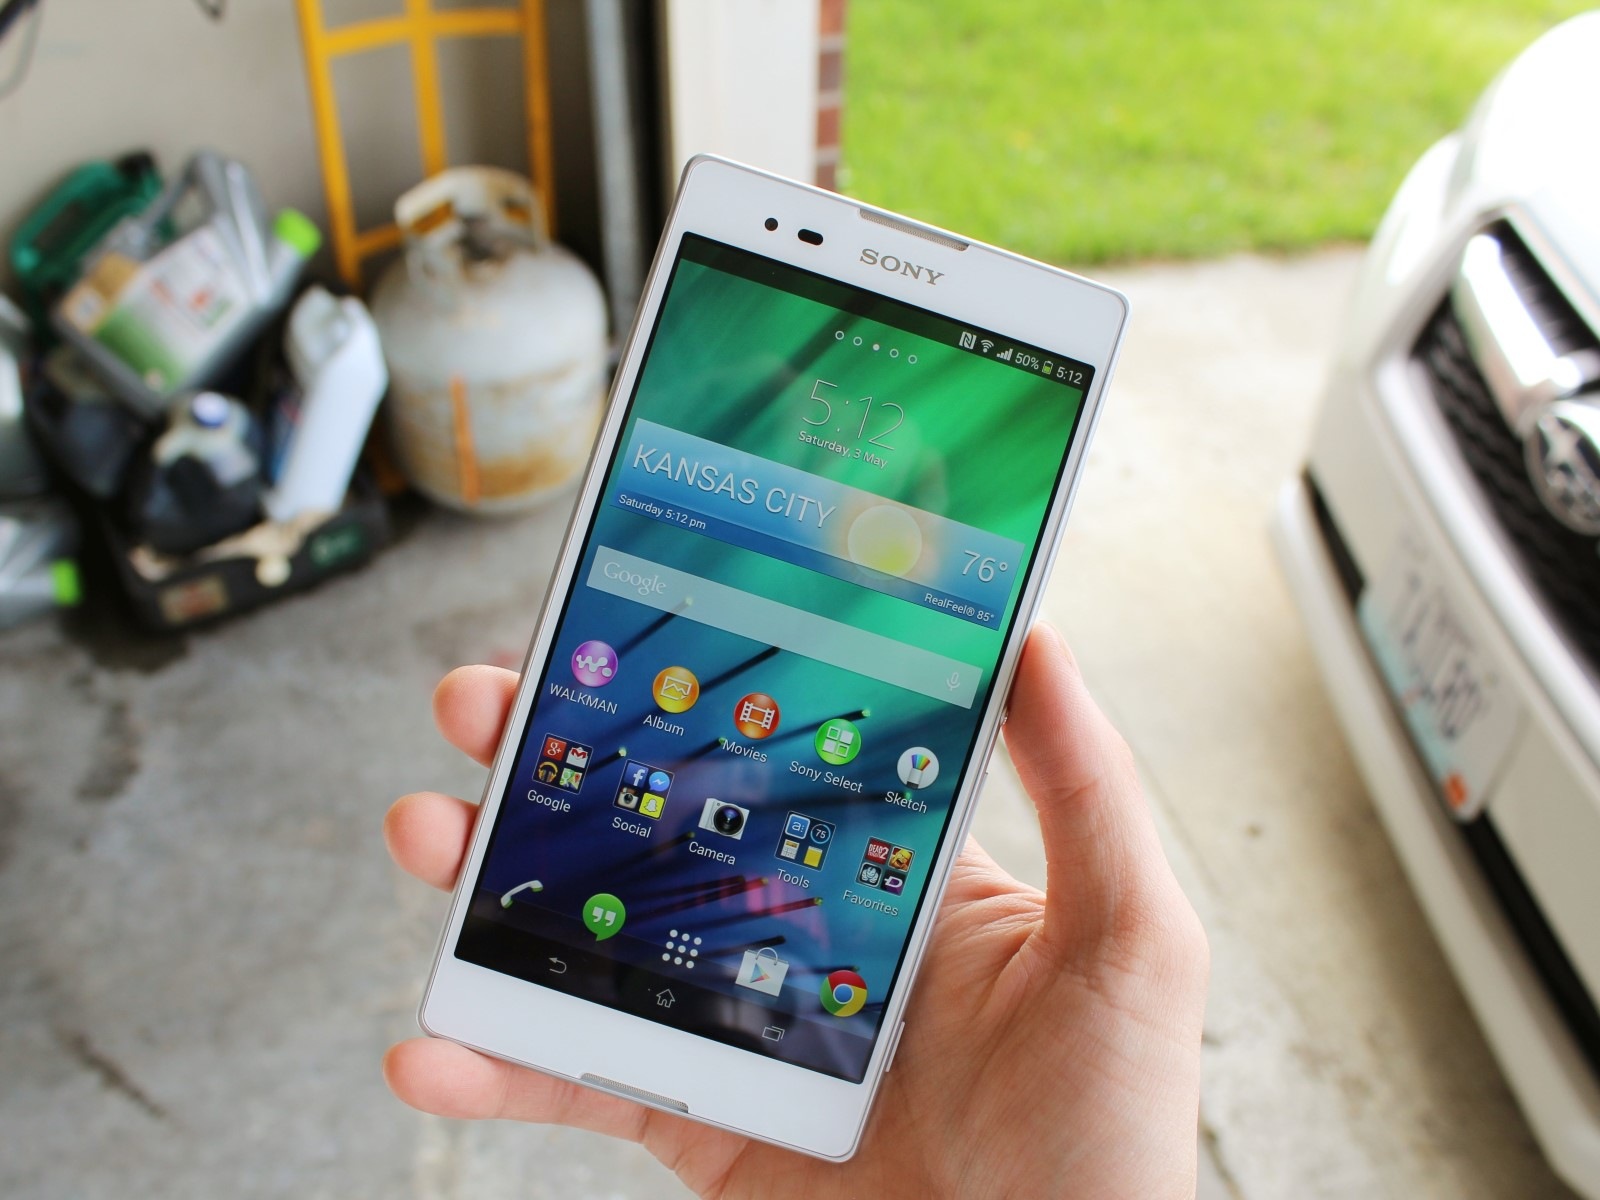 Configuring Sony Xperia T2 Ultra For Net10 Networks: A Quick Guide